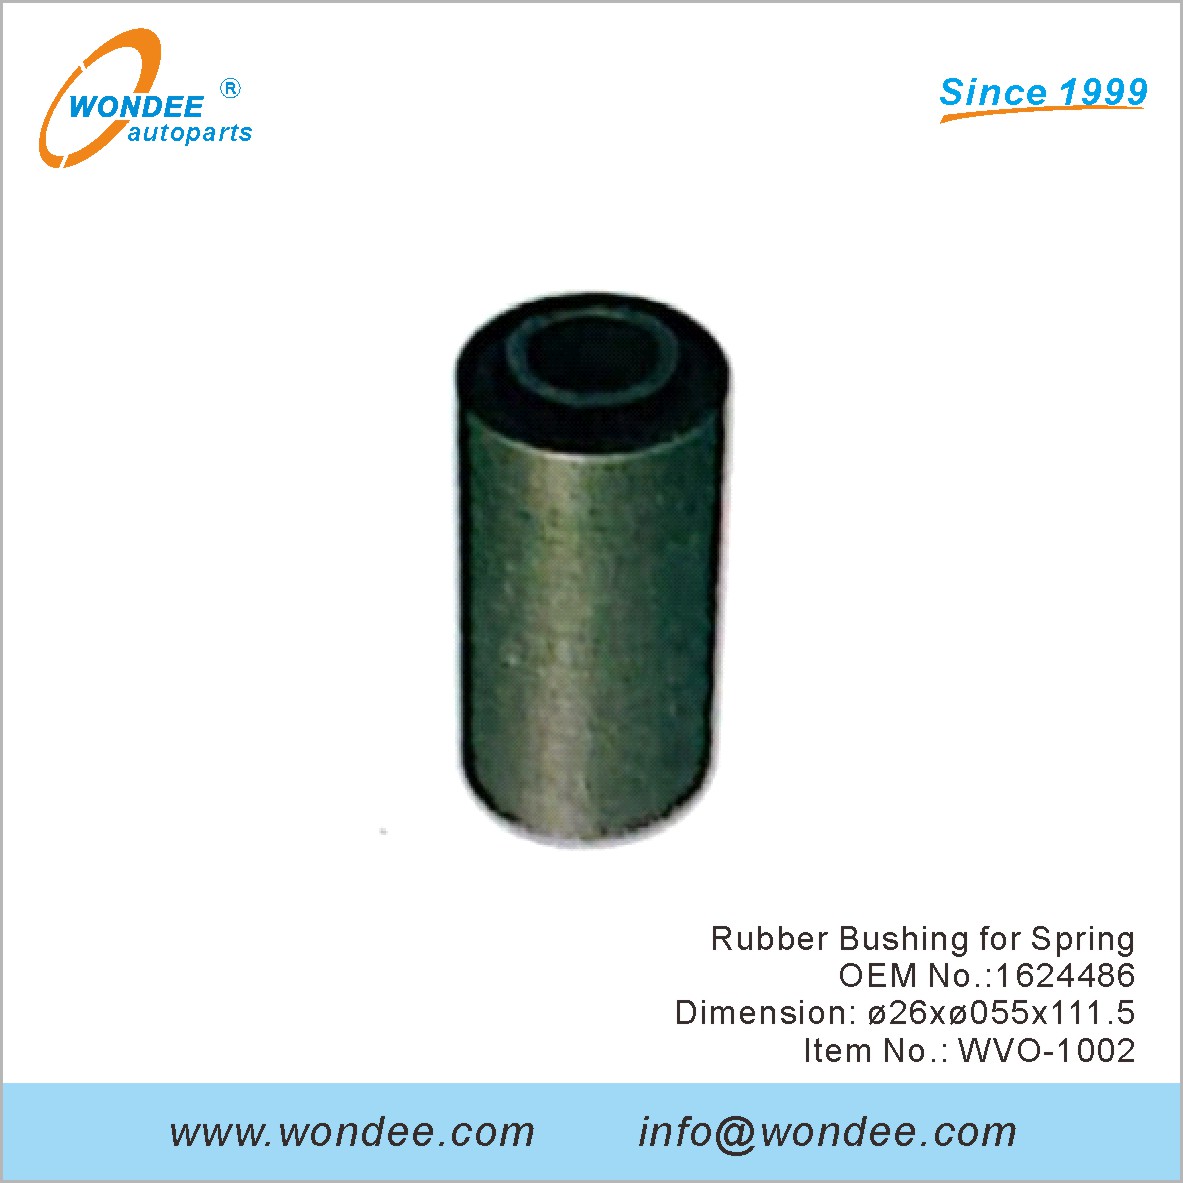 Rubber Bushing for Spring OEM 1624486 for Volvo from WONDEE